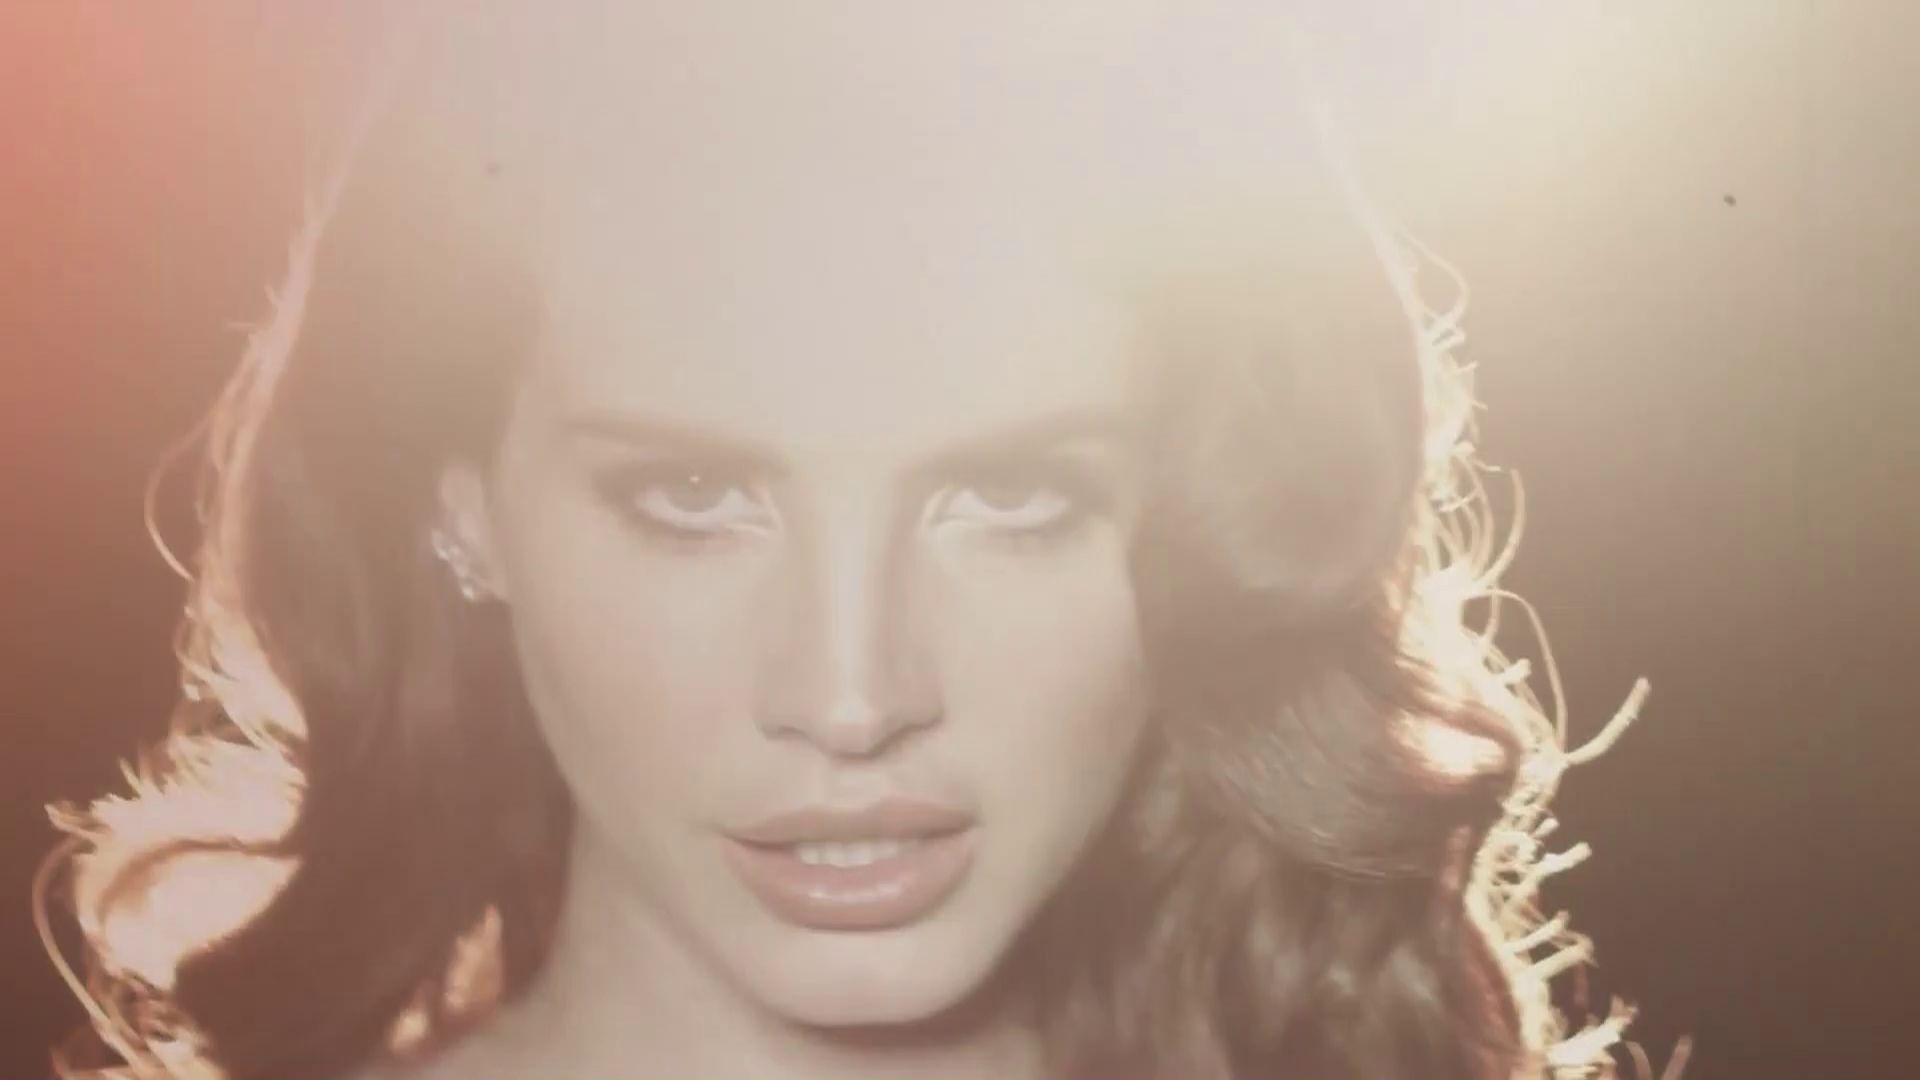 Lana Del Rey - Summertime Sadness (Lossless Music Video Lot) preview 5